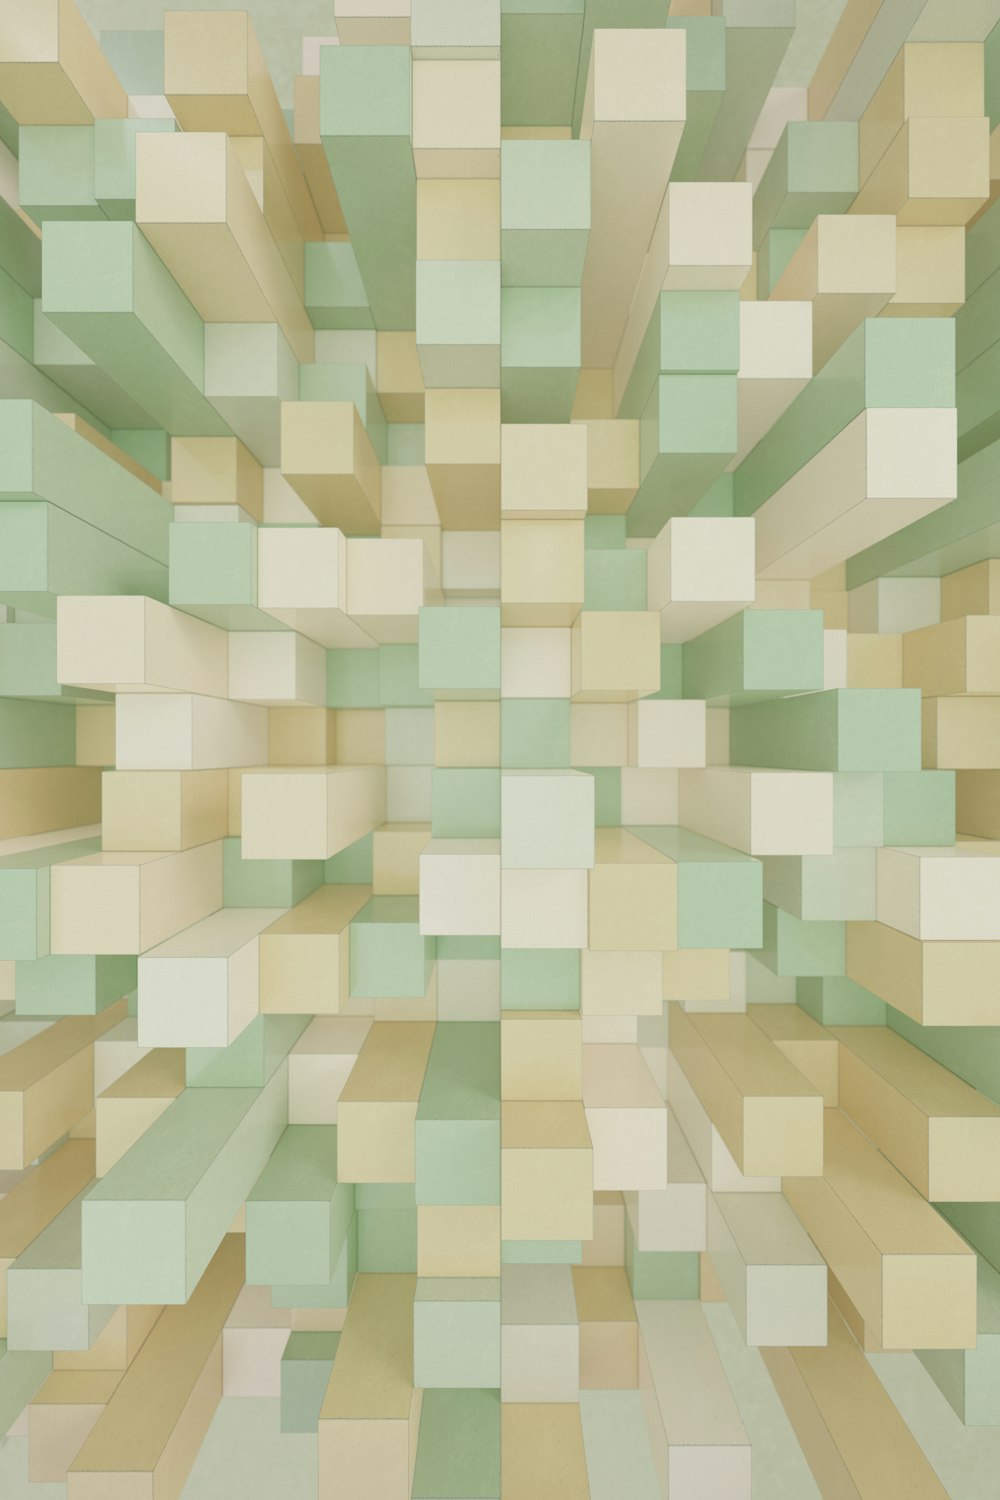 an abstract image of a green and beige cube pattern